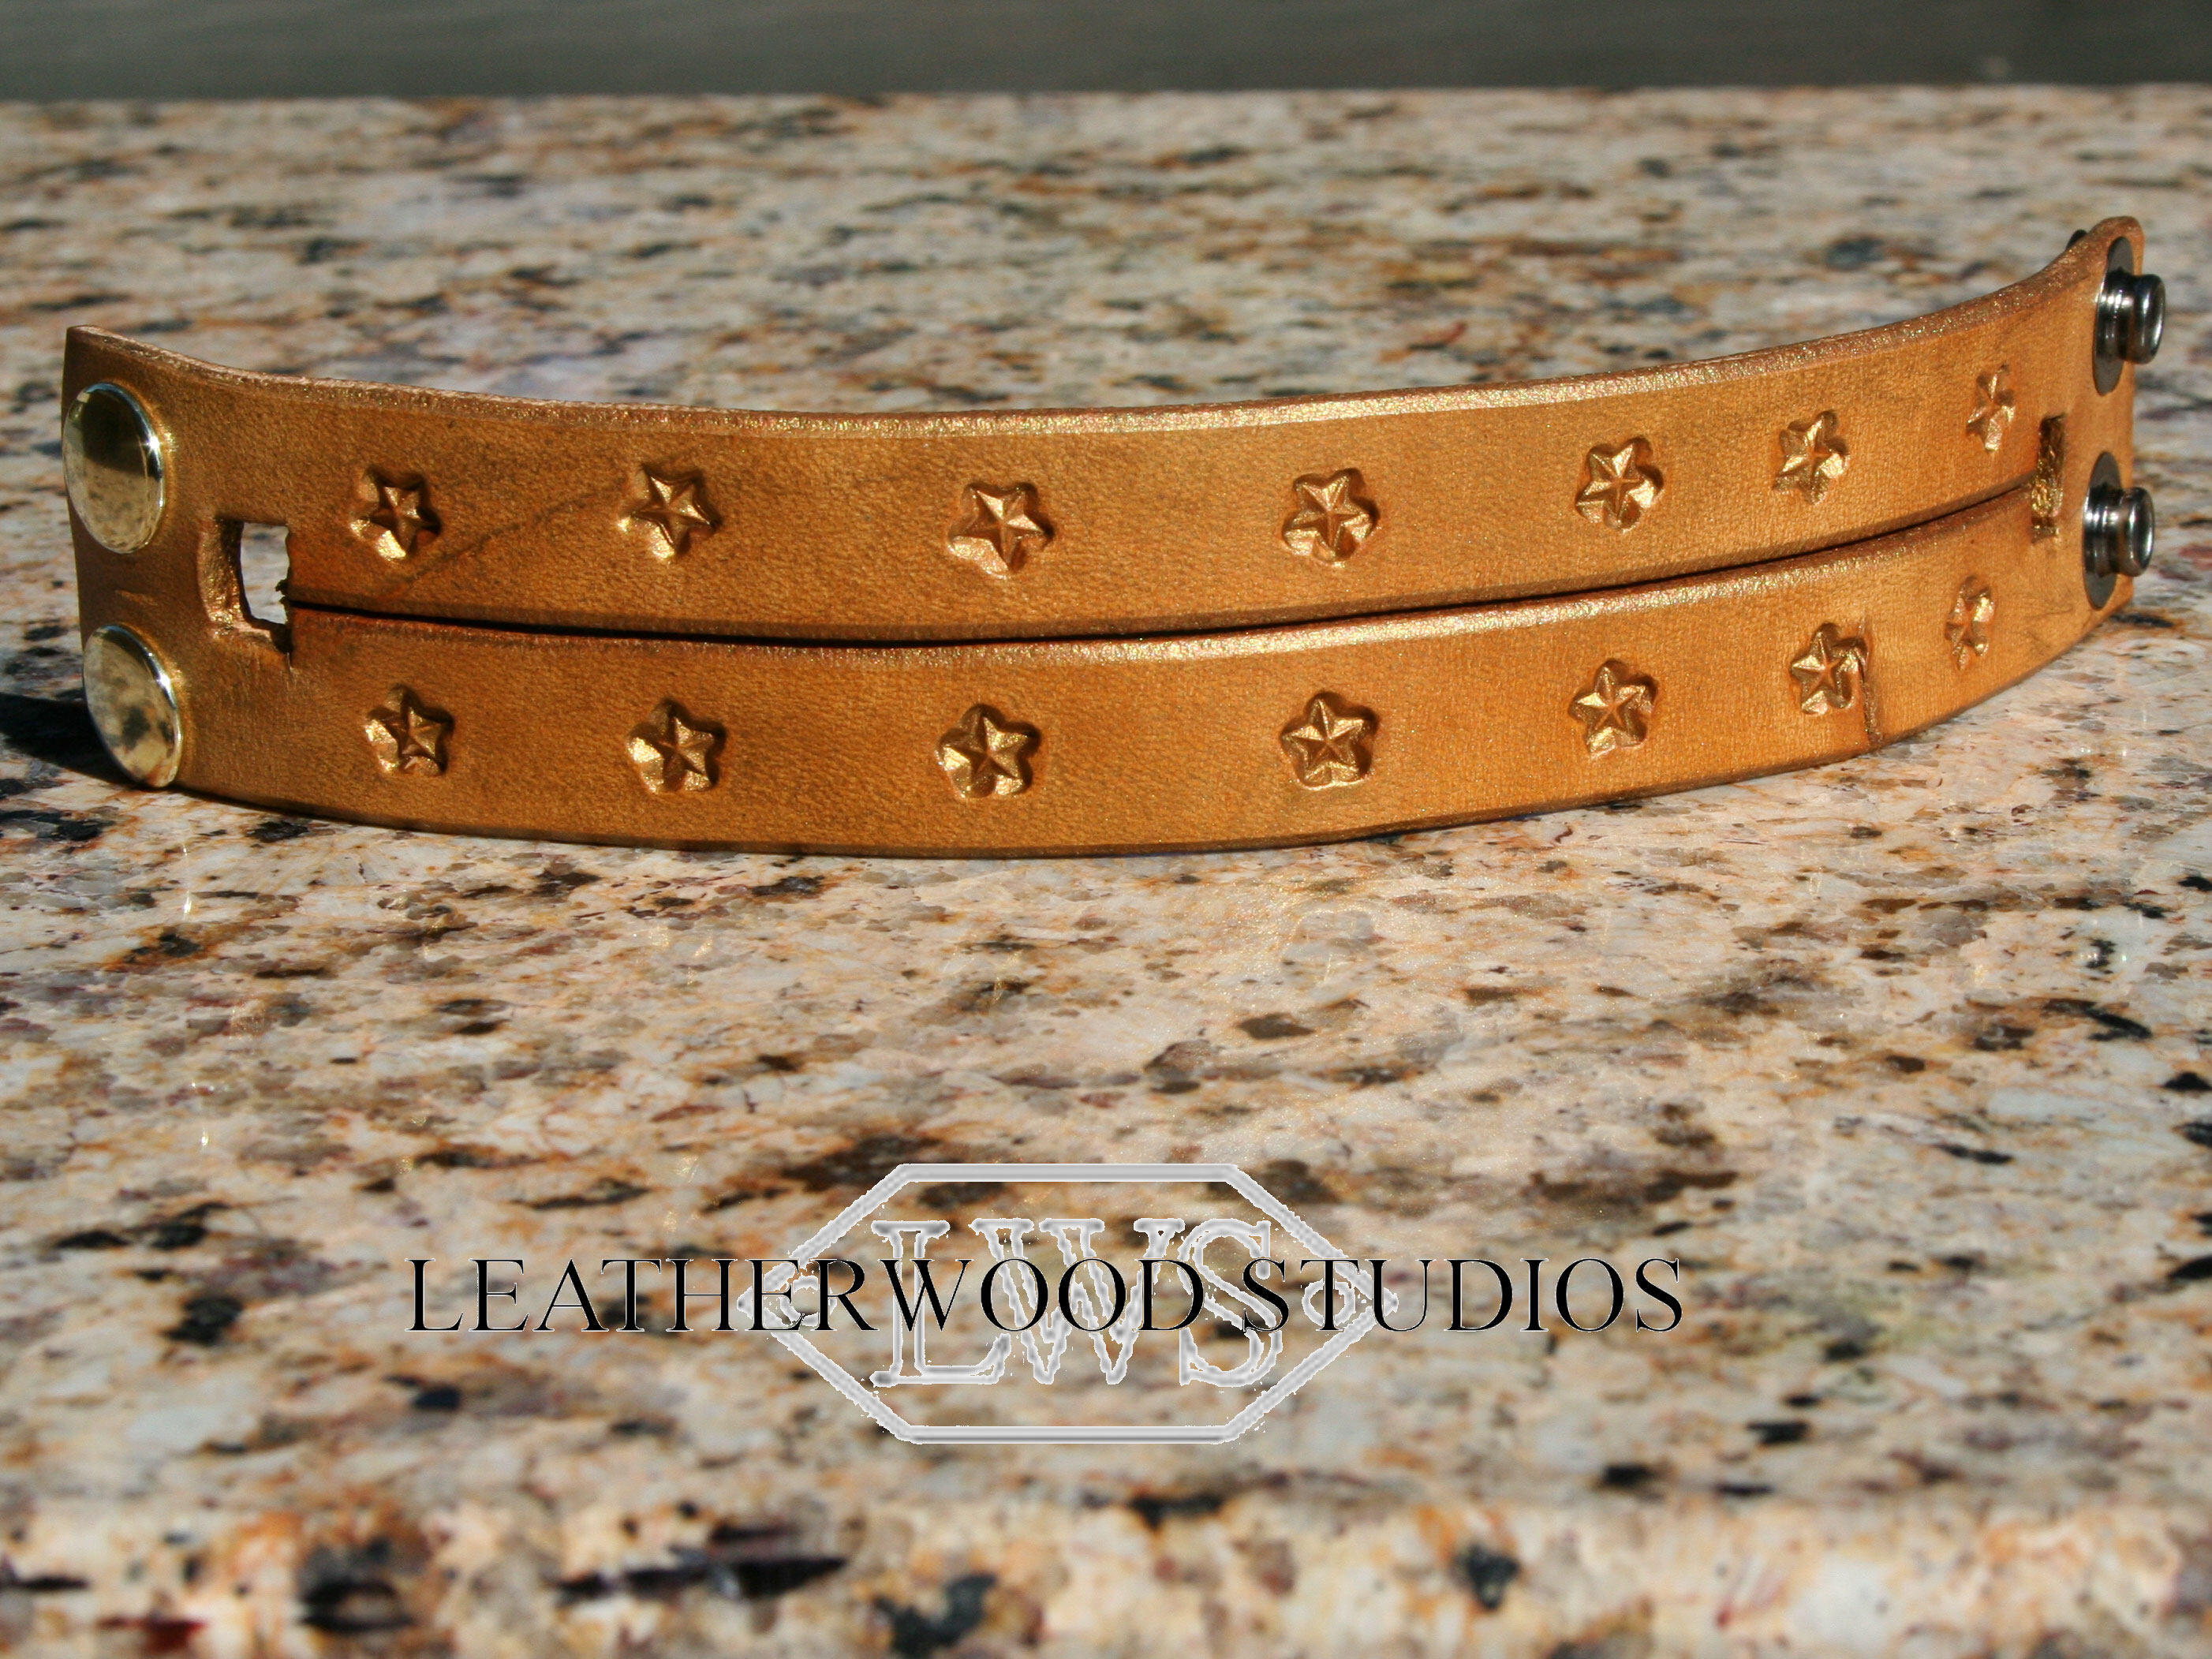 Products :: Metallic Gold Leather Bracelet Cuff Wrist Restraint Slave Wear  with Hand Tooled Design